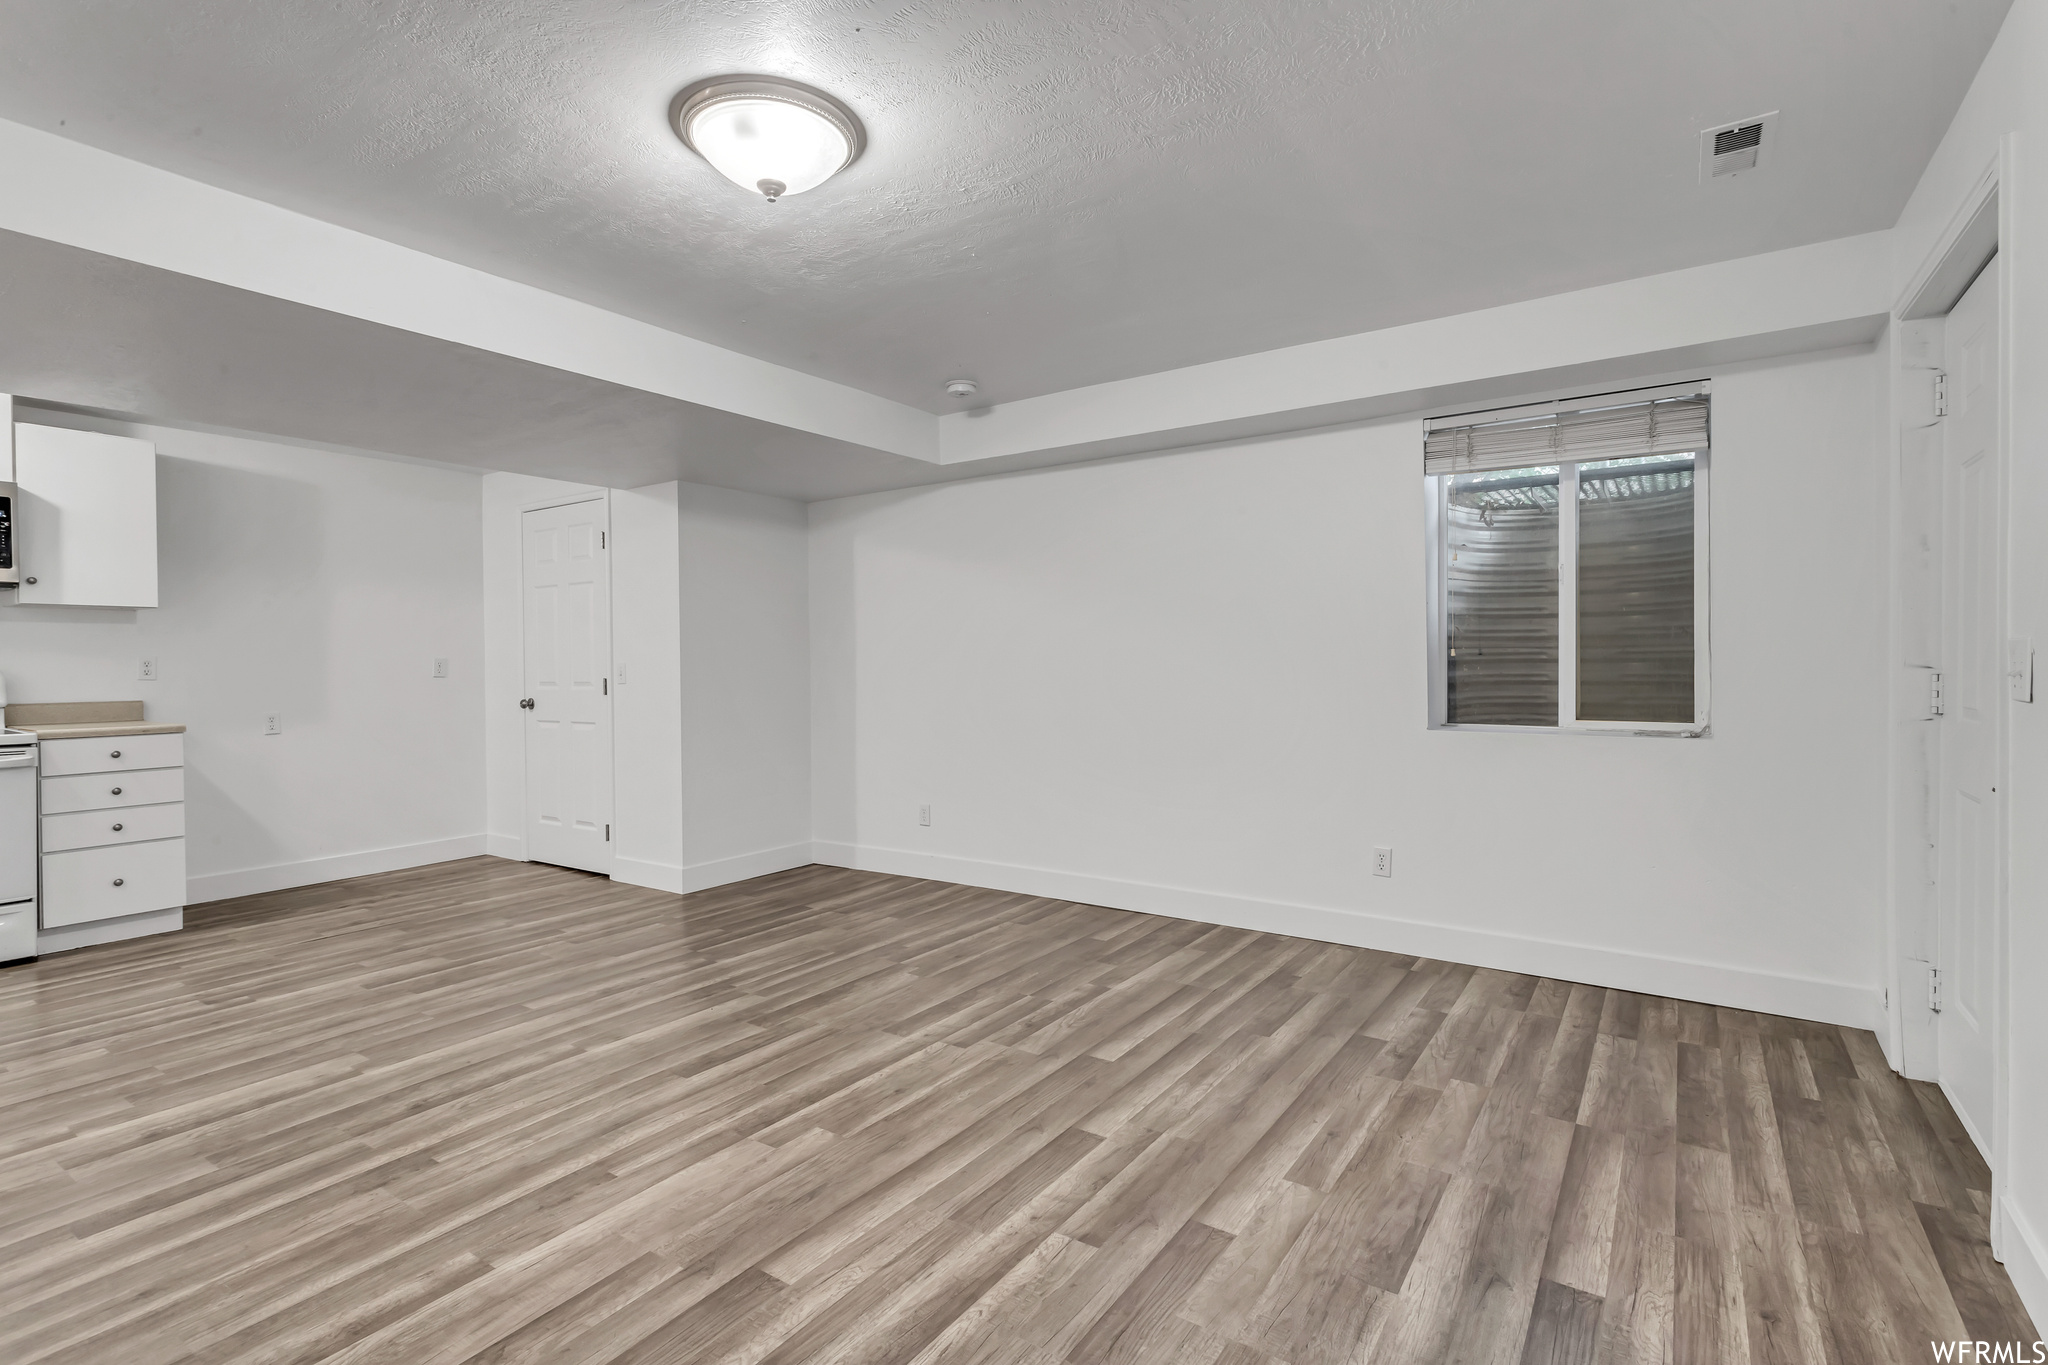 Basement with a textured ceiling and light hardwood floors